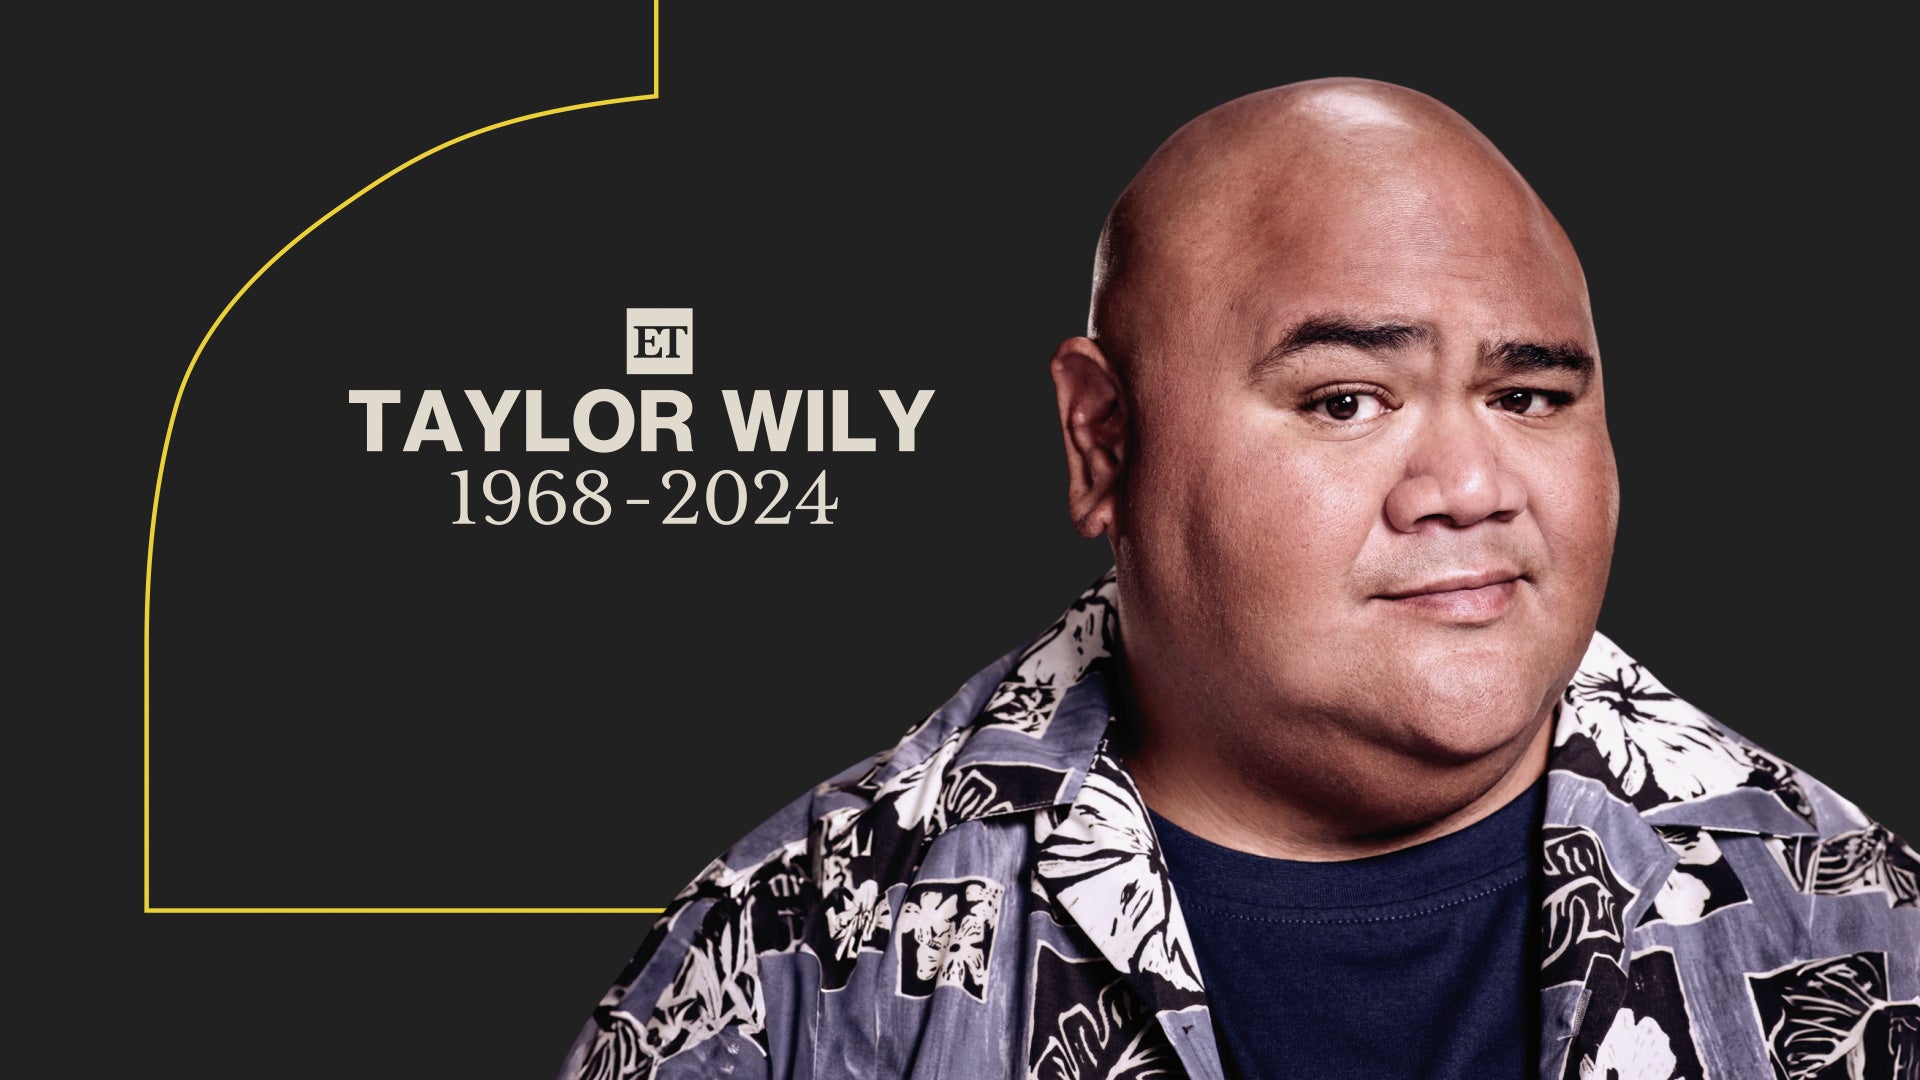 'Hawaii Five-0' and 'Magnum P.I' Actor Taylor Wily Dead at 56